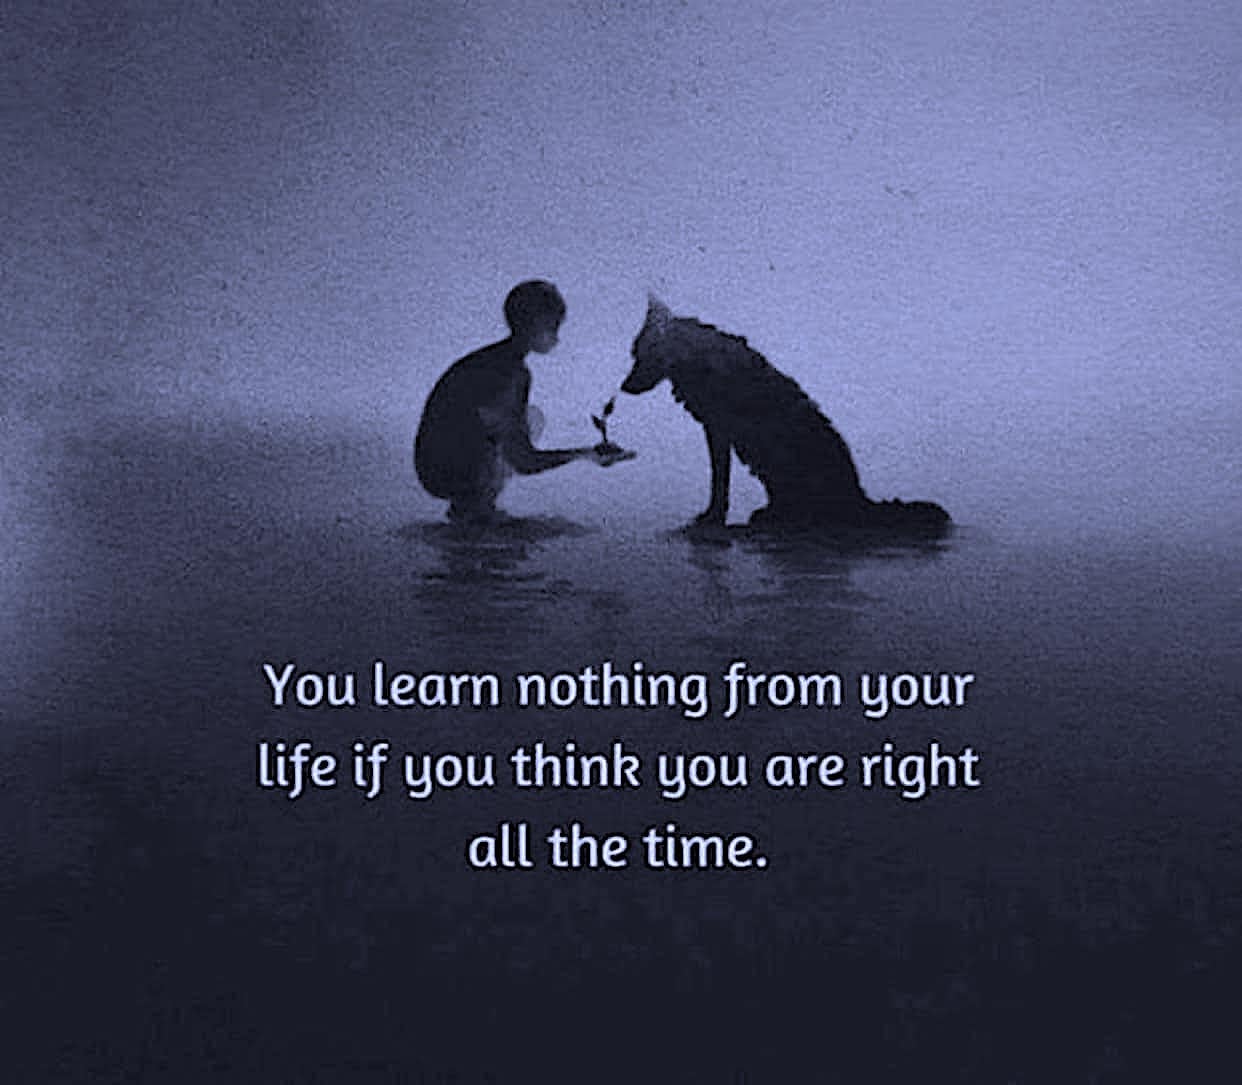 you learn nothing from your life if you think you're right all the time